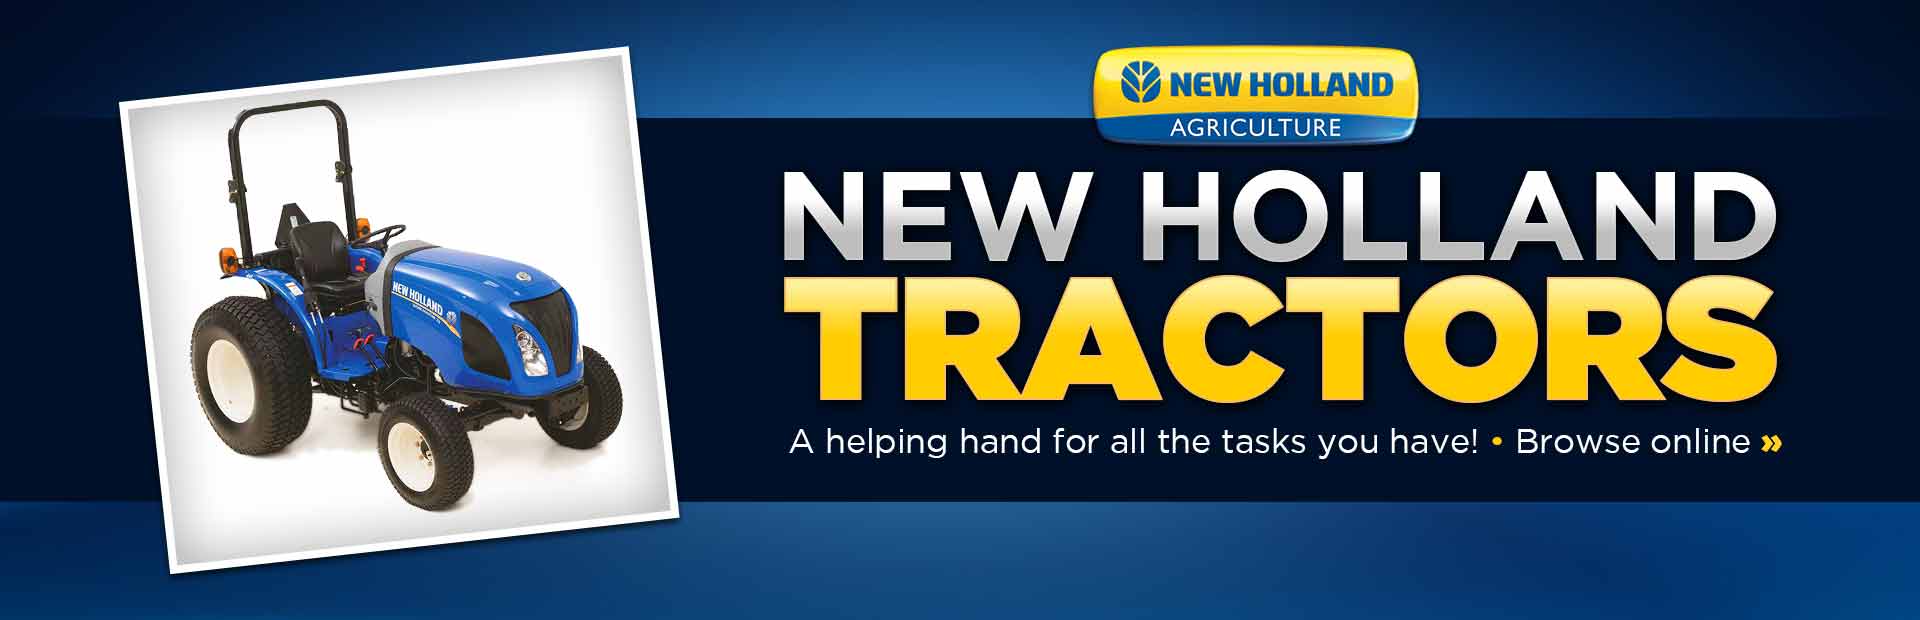 New Holland Tractor Logo - Cherry Valley Tractor Sales provides premium outdoor power equipment